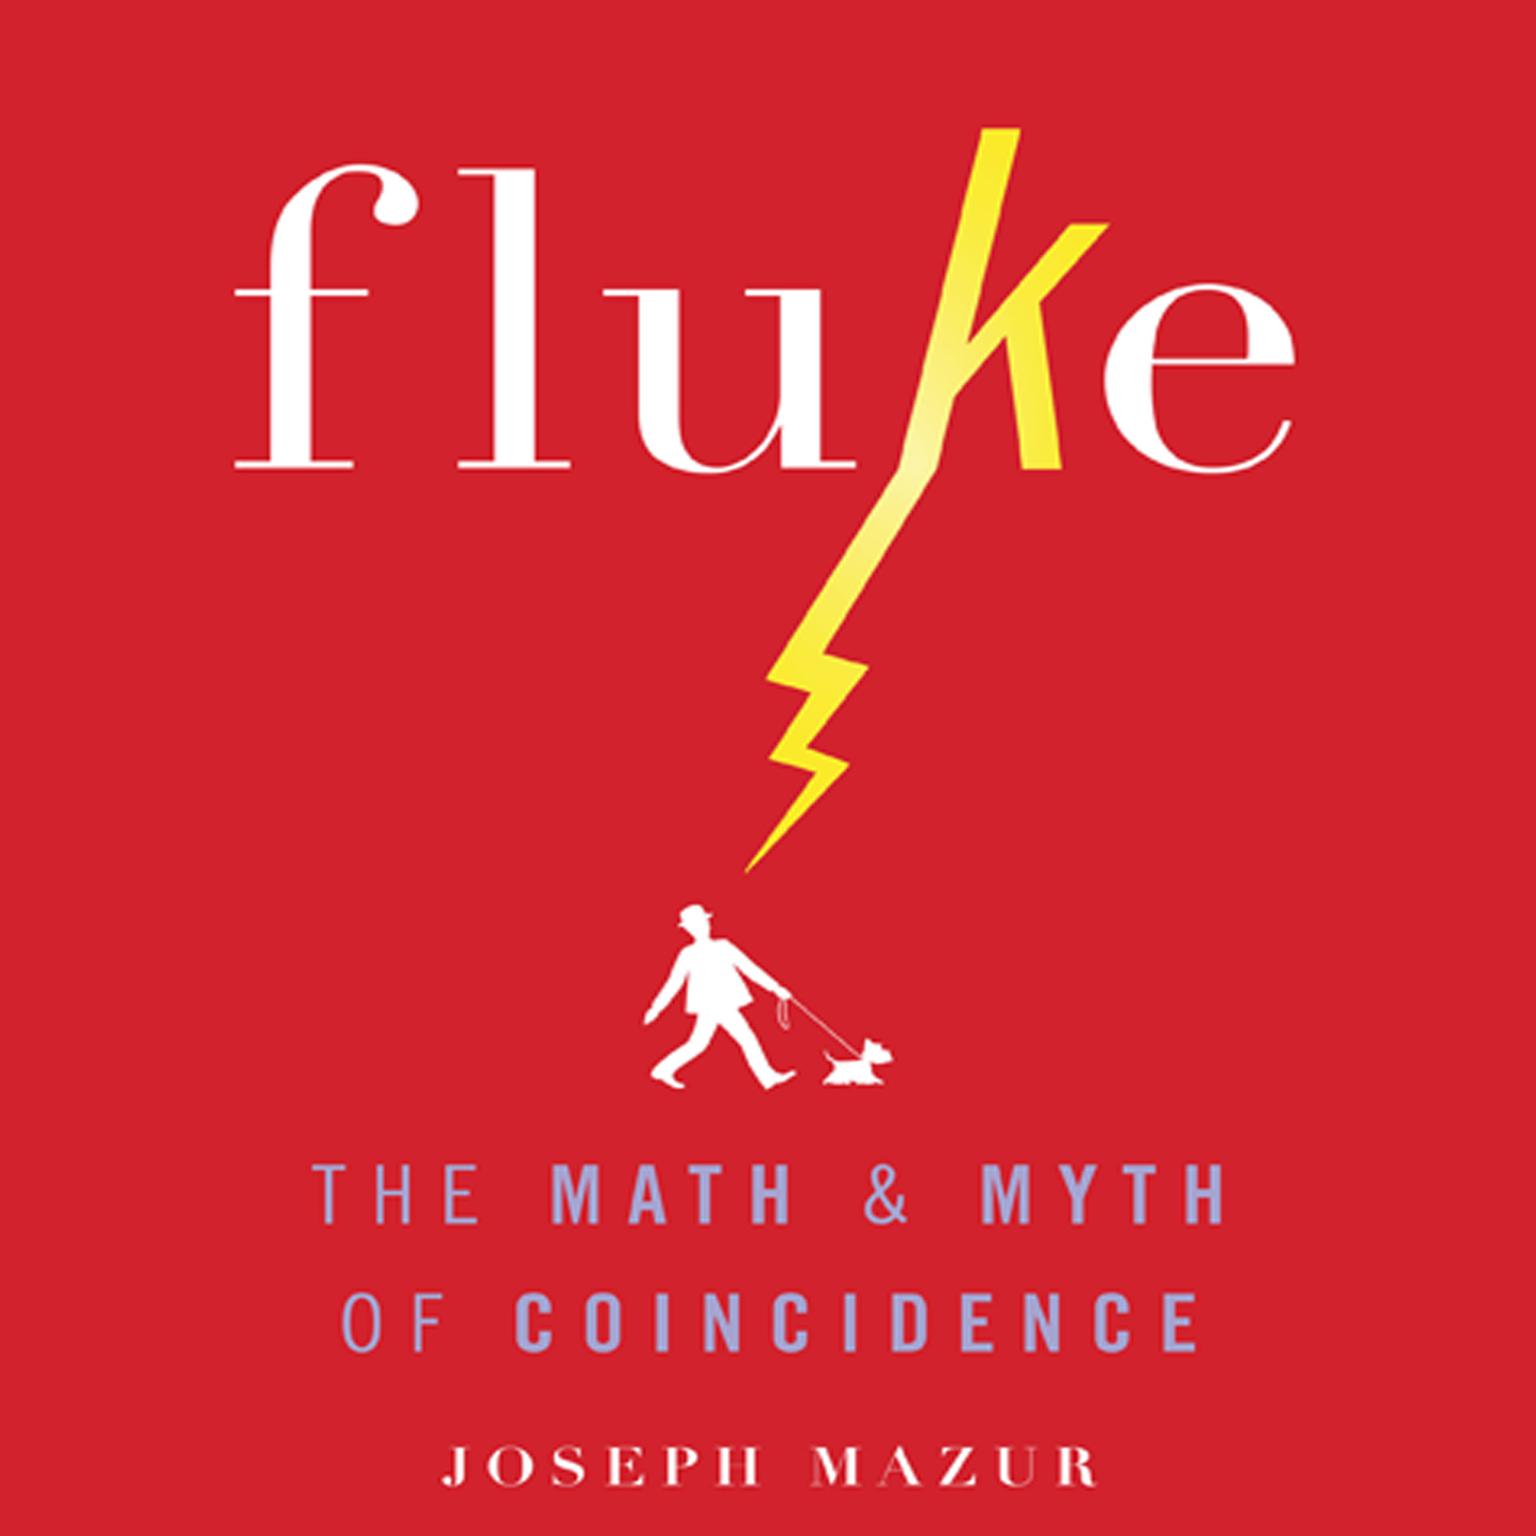 Fluke: The Math and Myth of Coincidence Audiobook, by Joseph Mazur